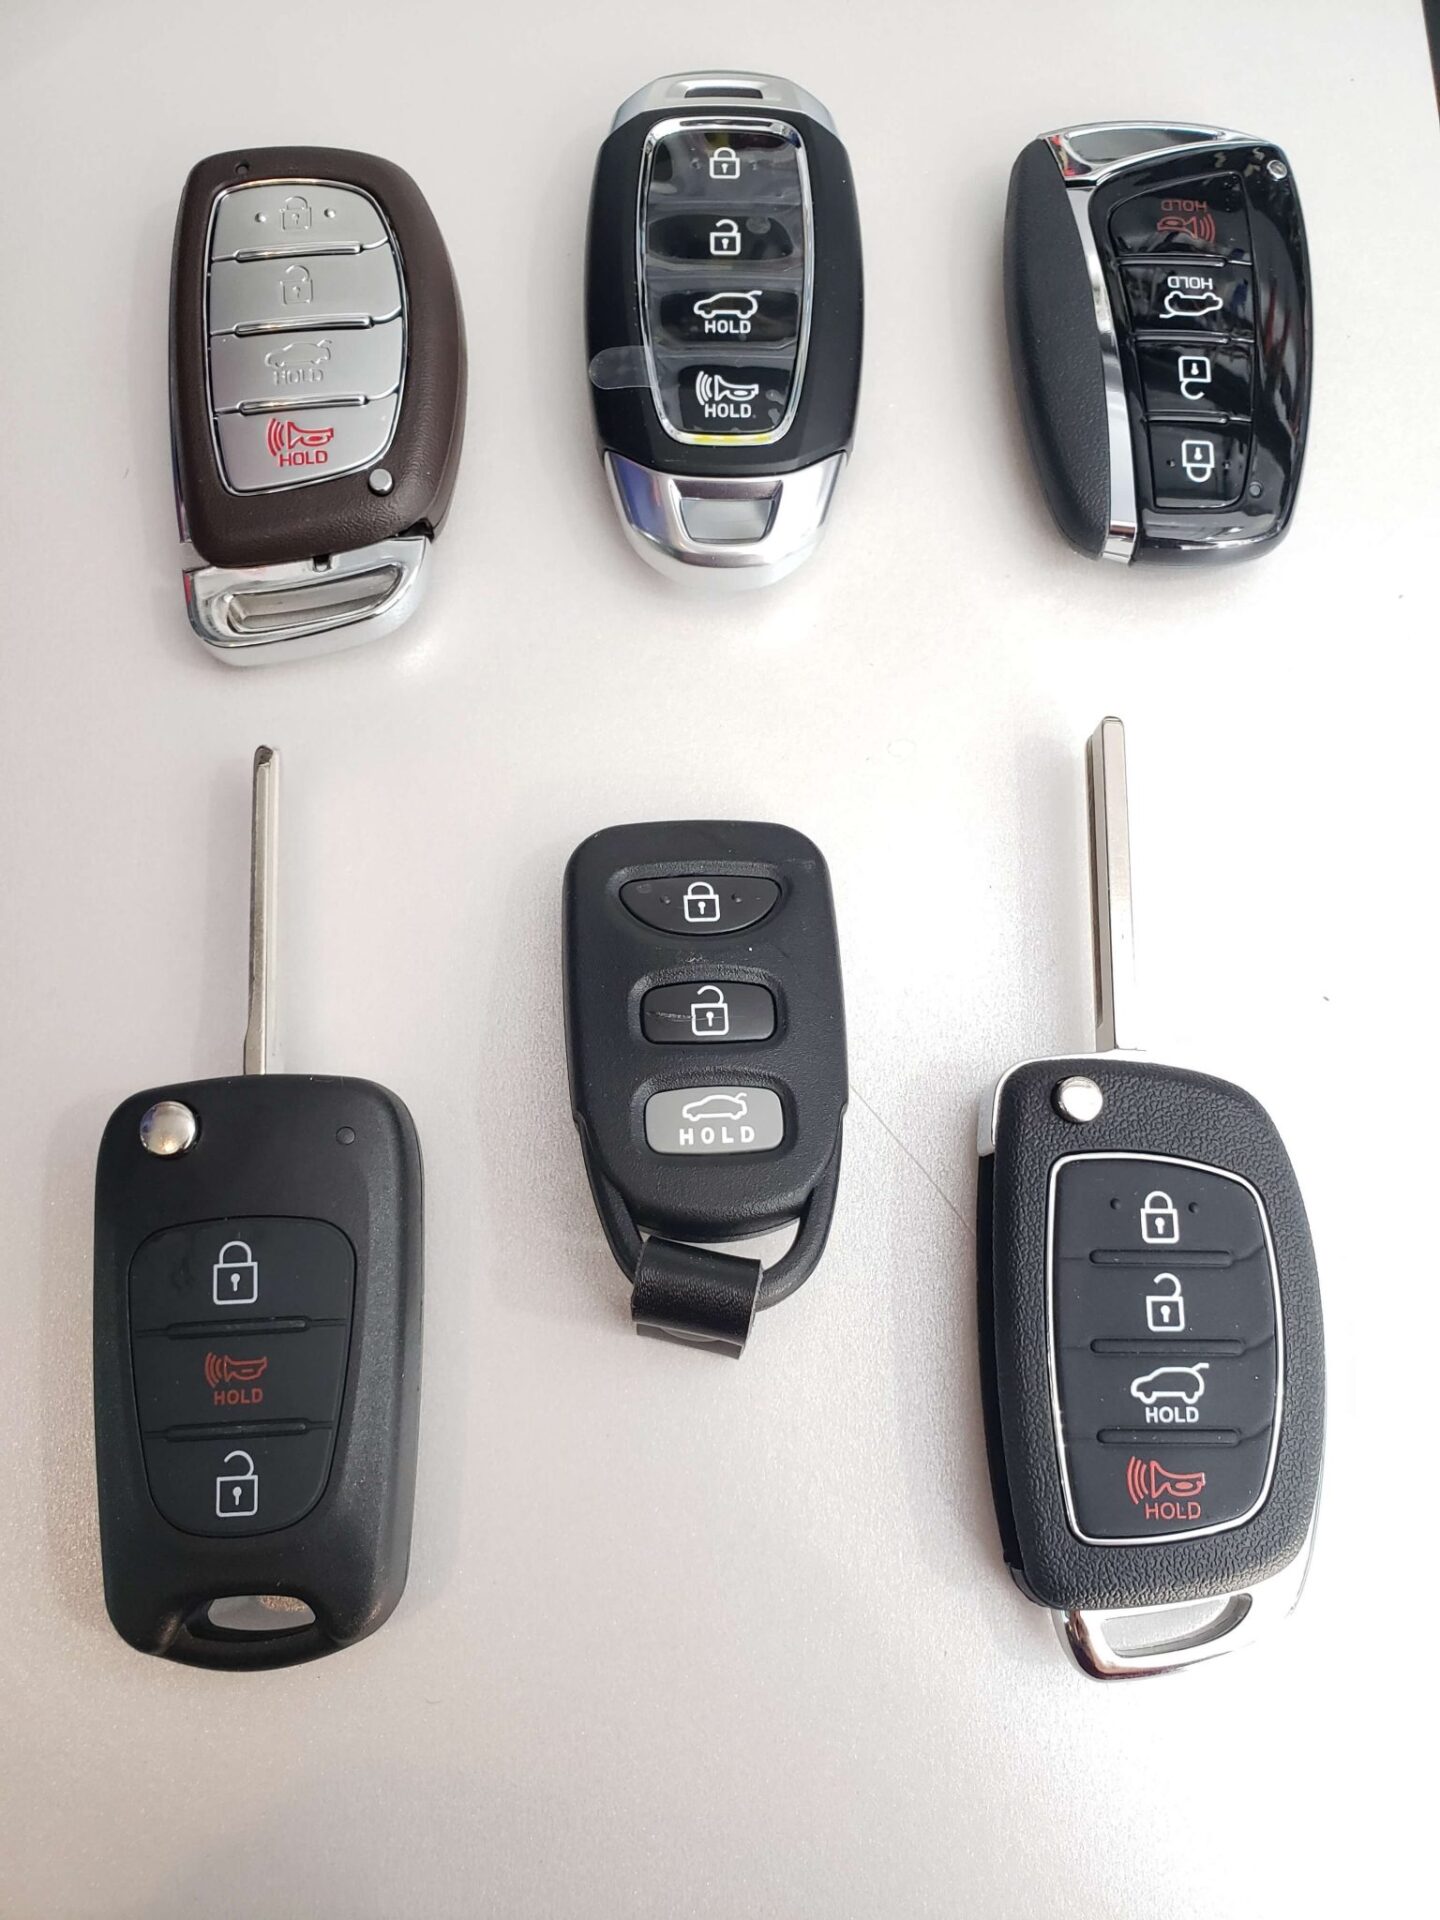 Replacement For 1998 1999 2000 2001 2002 Isuzu Trooper Car Key Fob Remote